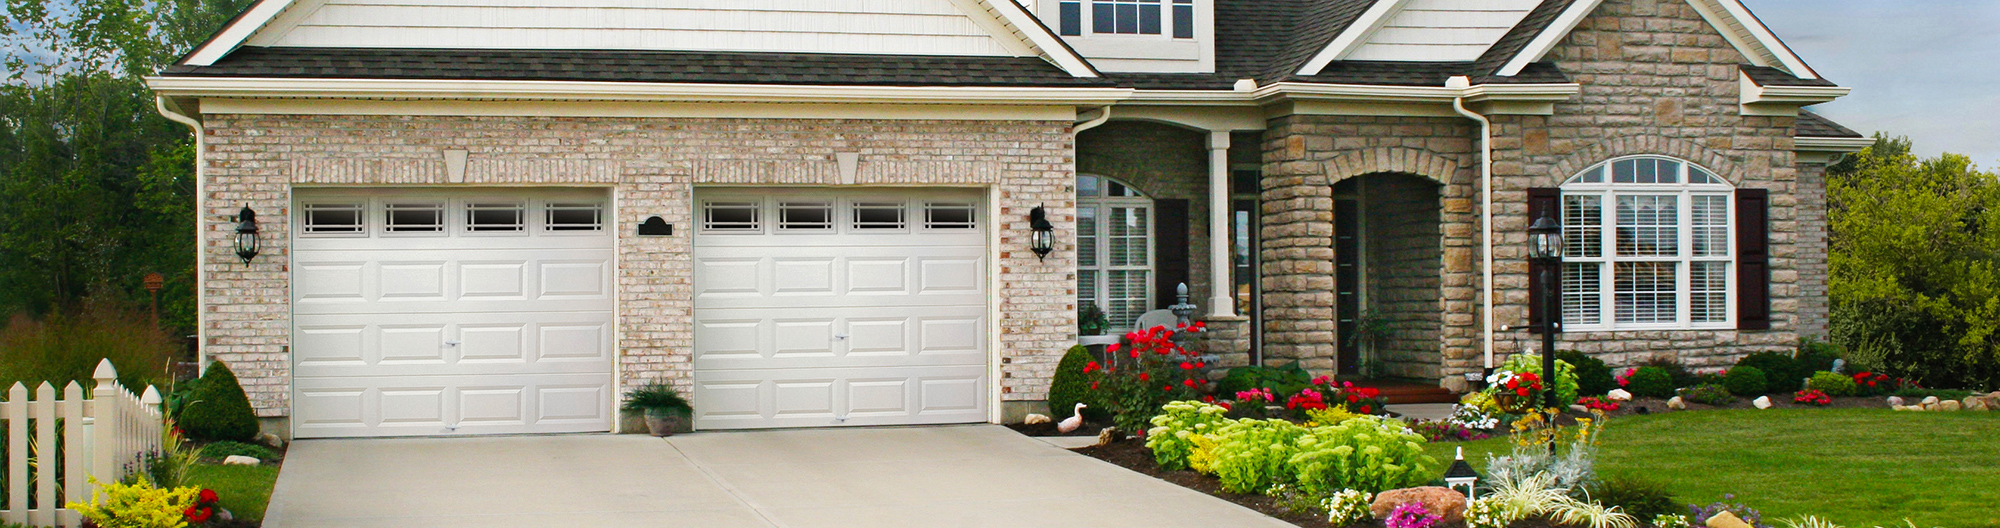 Modern Garage Door Repair Hickory Nc for Large Space